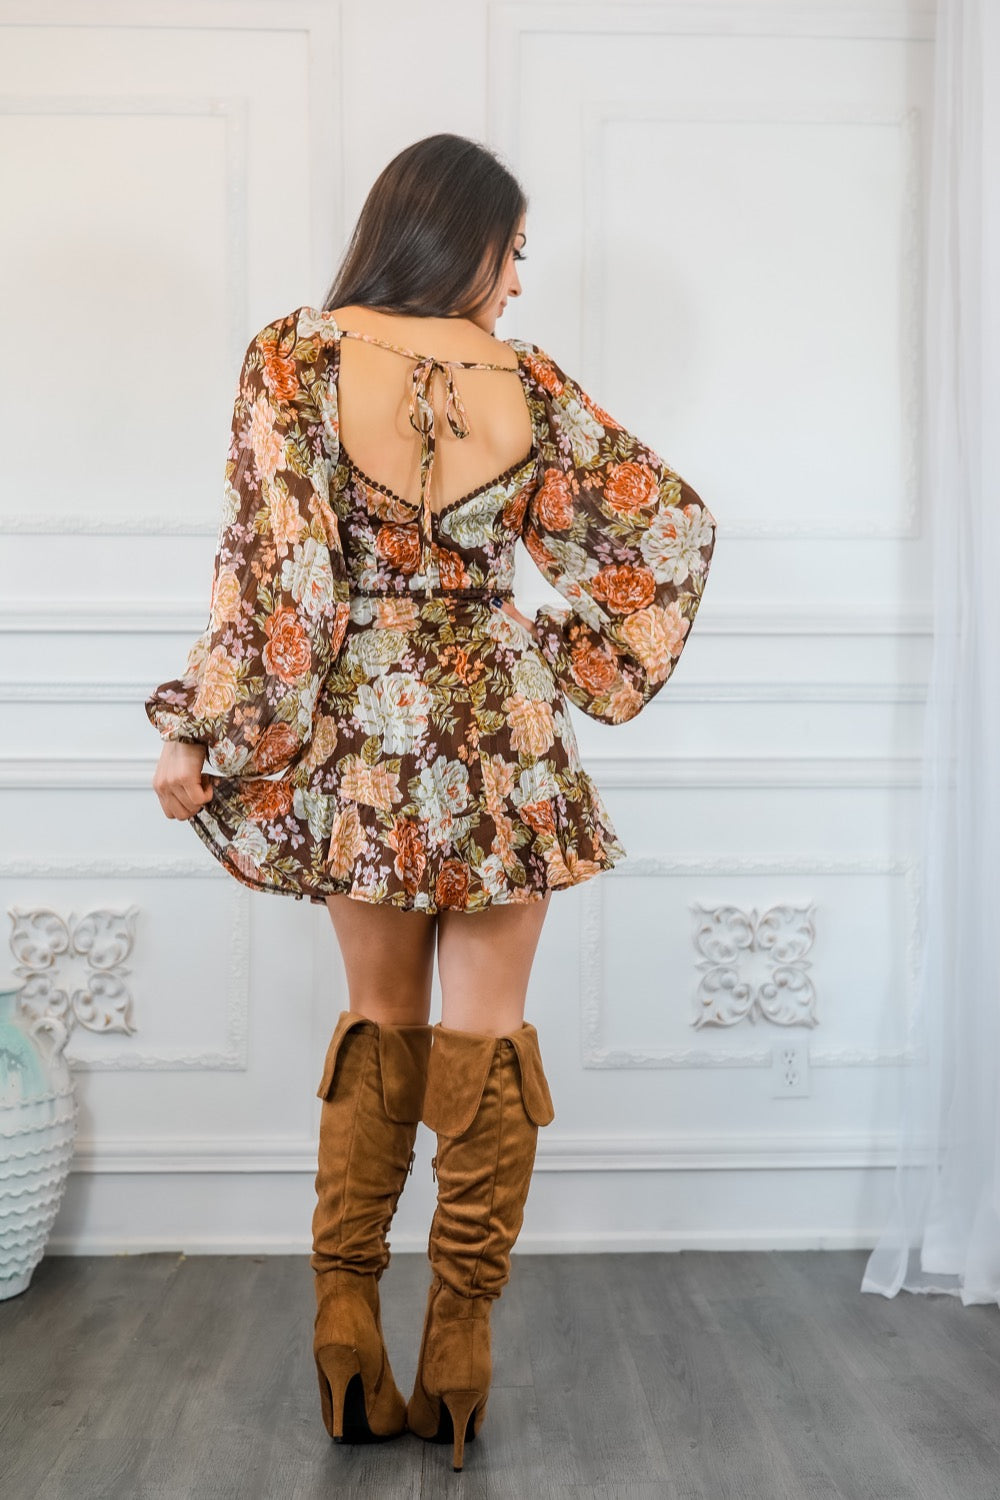 Sahara Lace Up Floral Romper with Peak a Boo Details